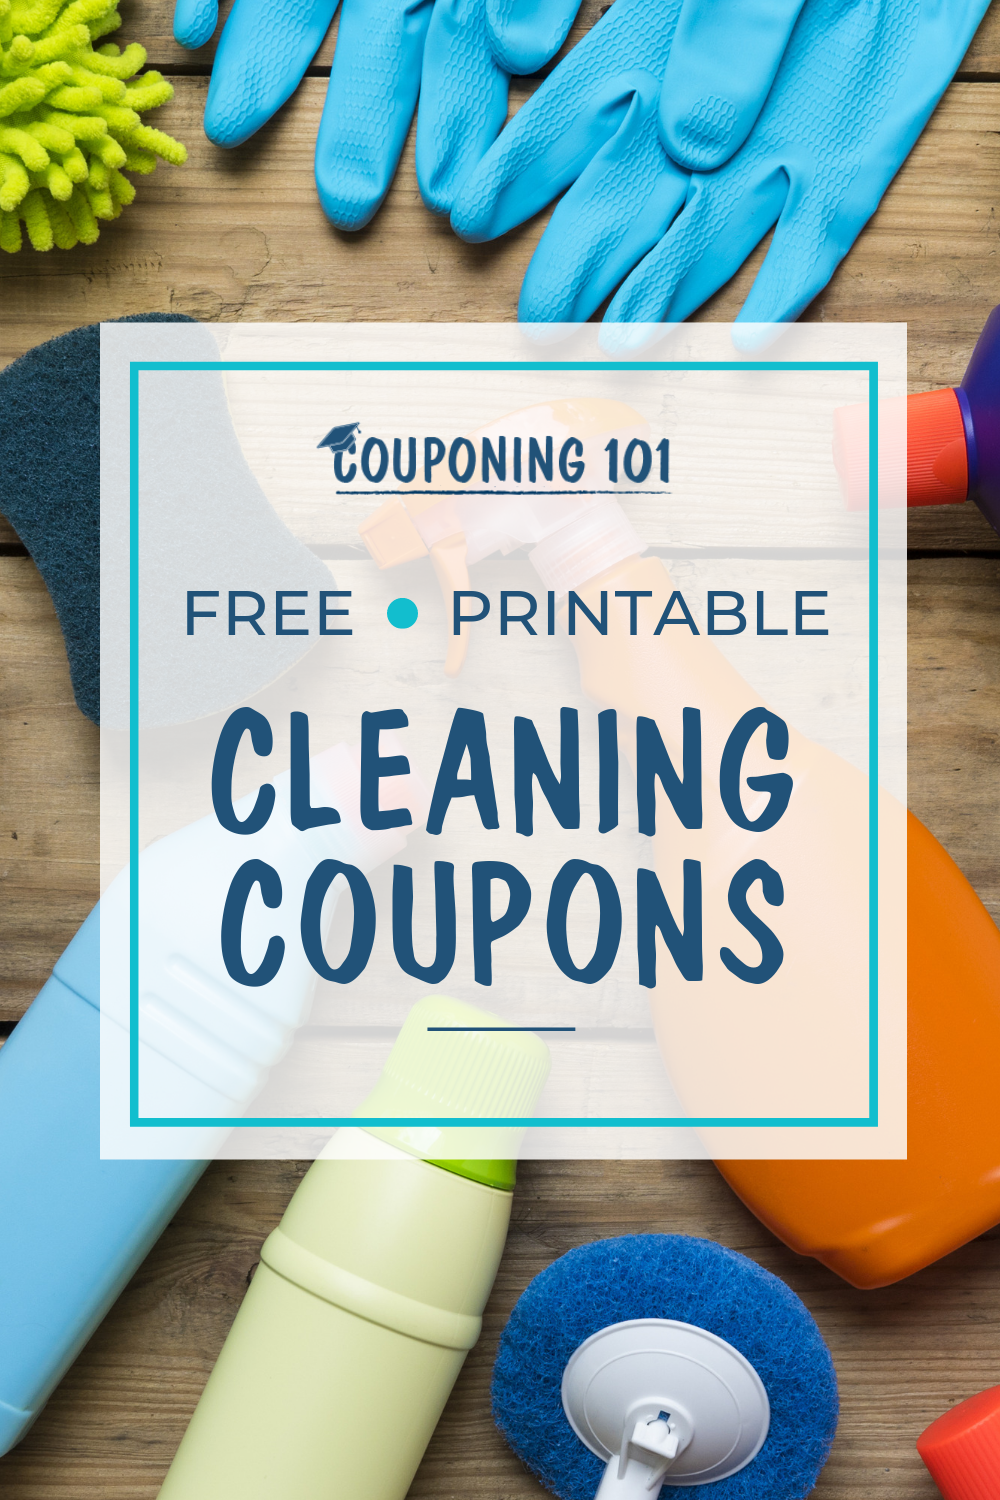 free-printable-cleaning-coupons-roundup-couponing-101